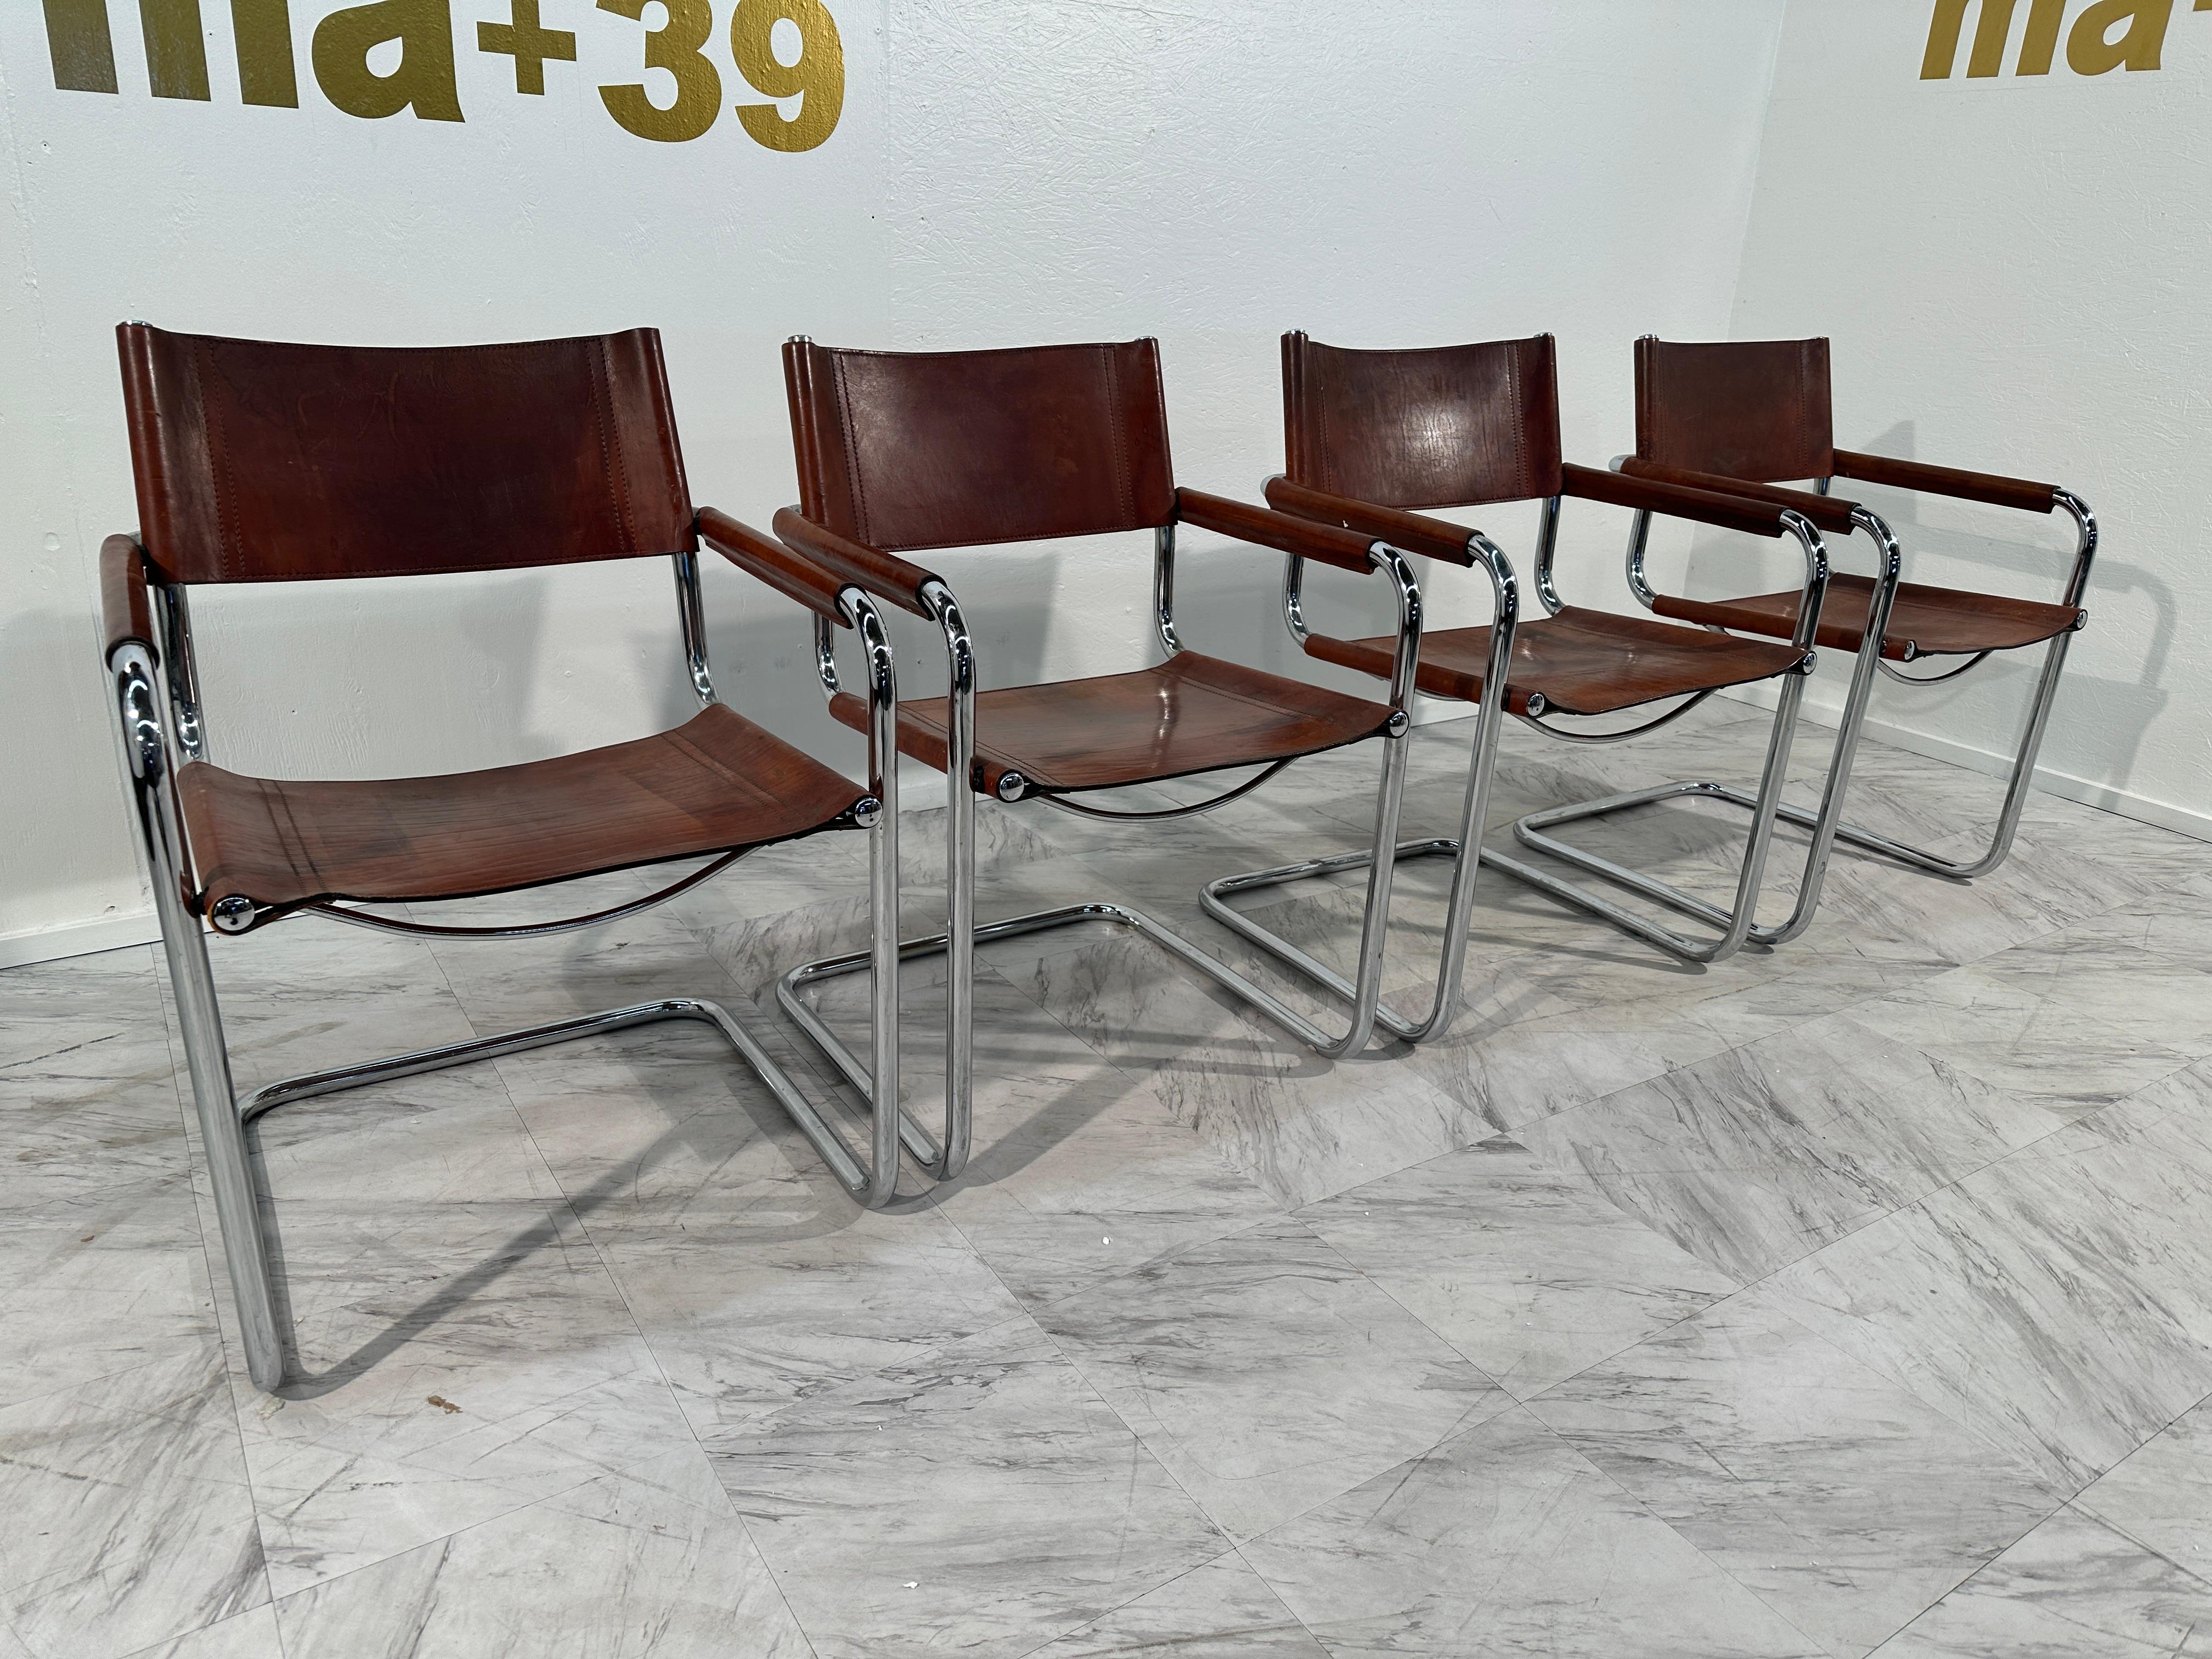 Cubic form, clear design, fine proportions, and flexing movement: The development of the perfected cantilever chairs S 33 and S 34, among the first of their kind, today combines zeitgeist and a sense of tradition. “Why four legs if two will